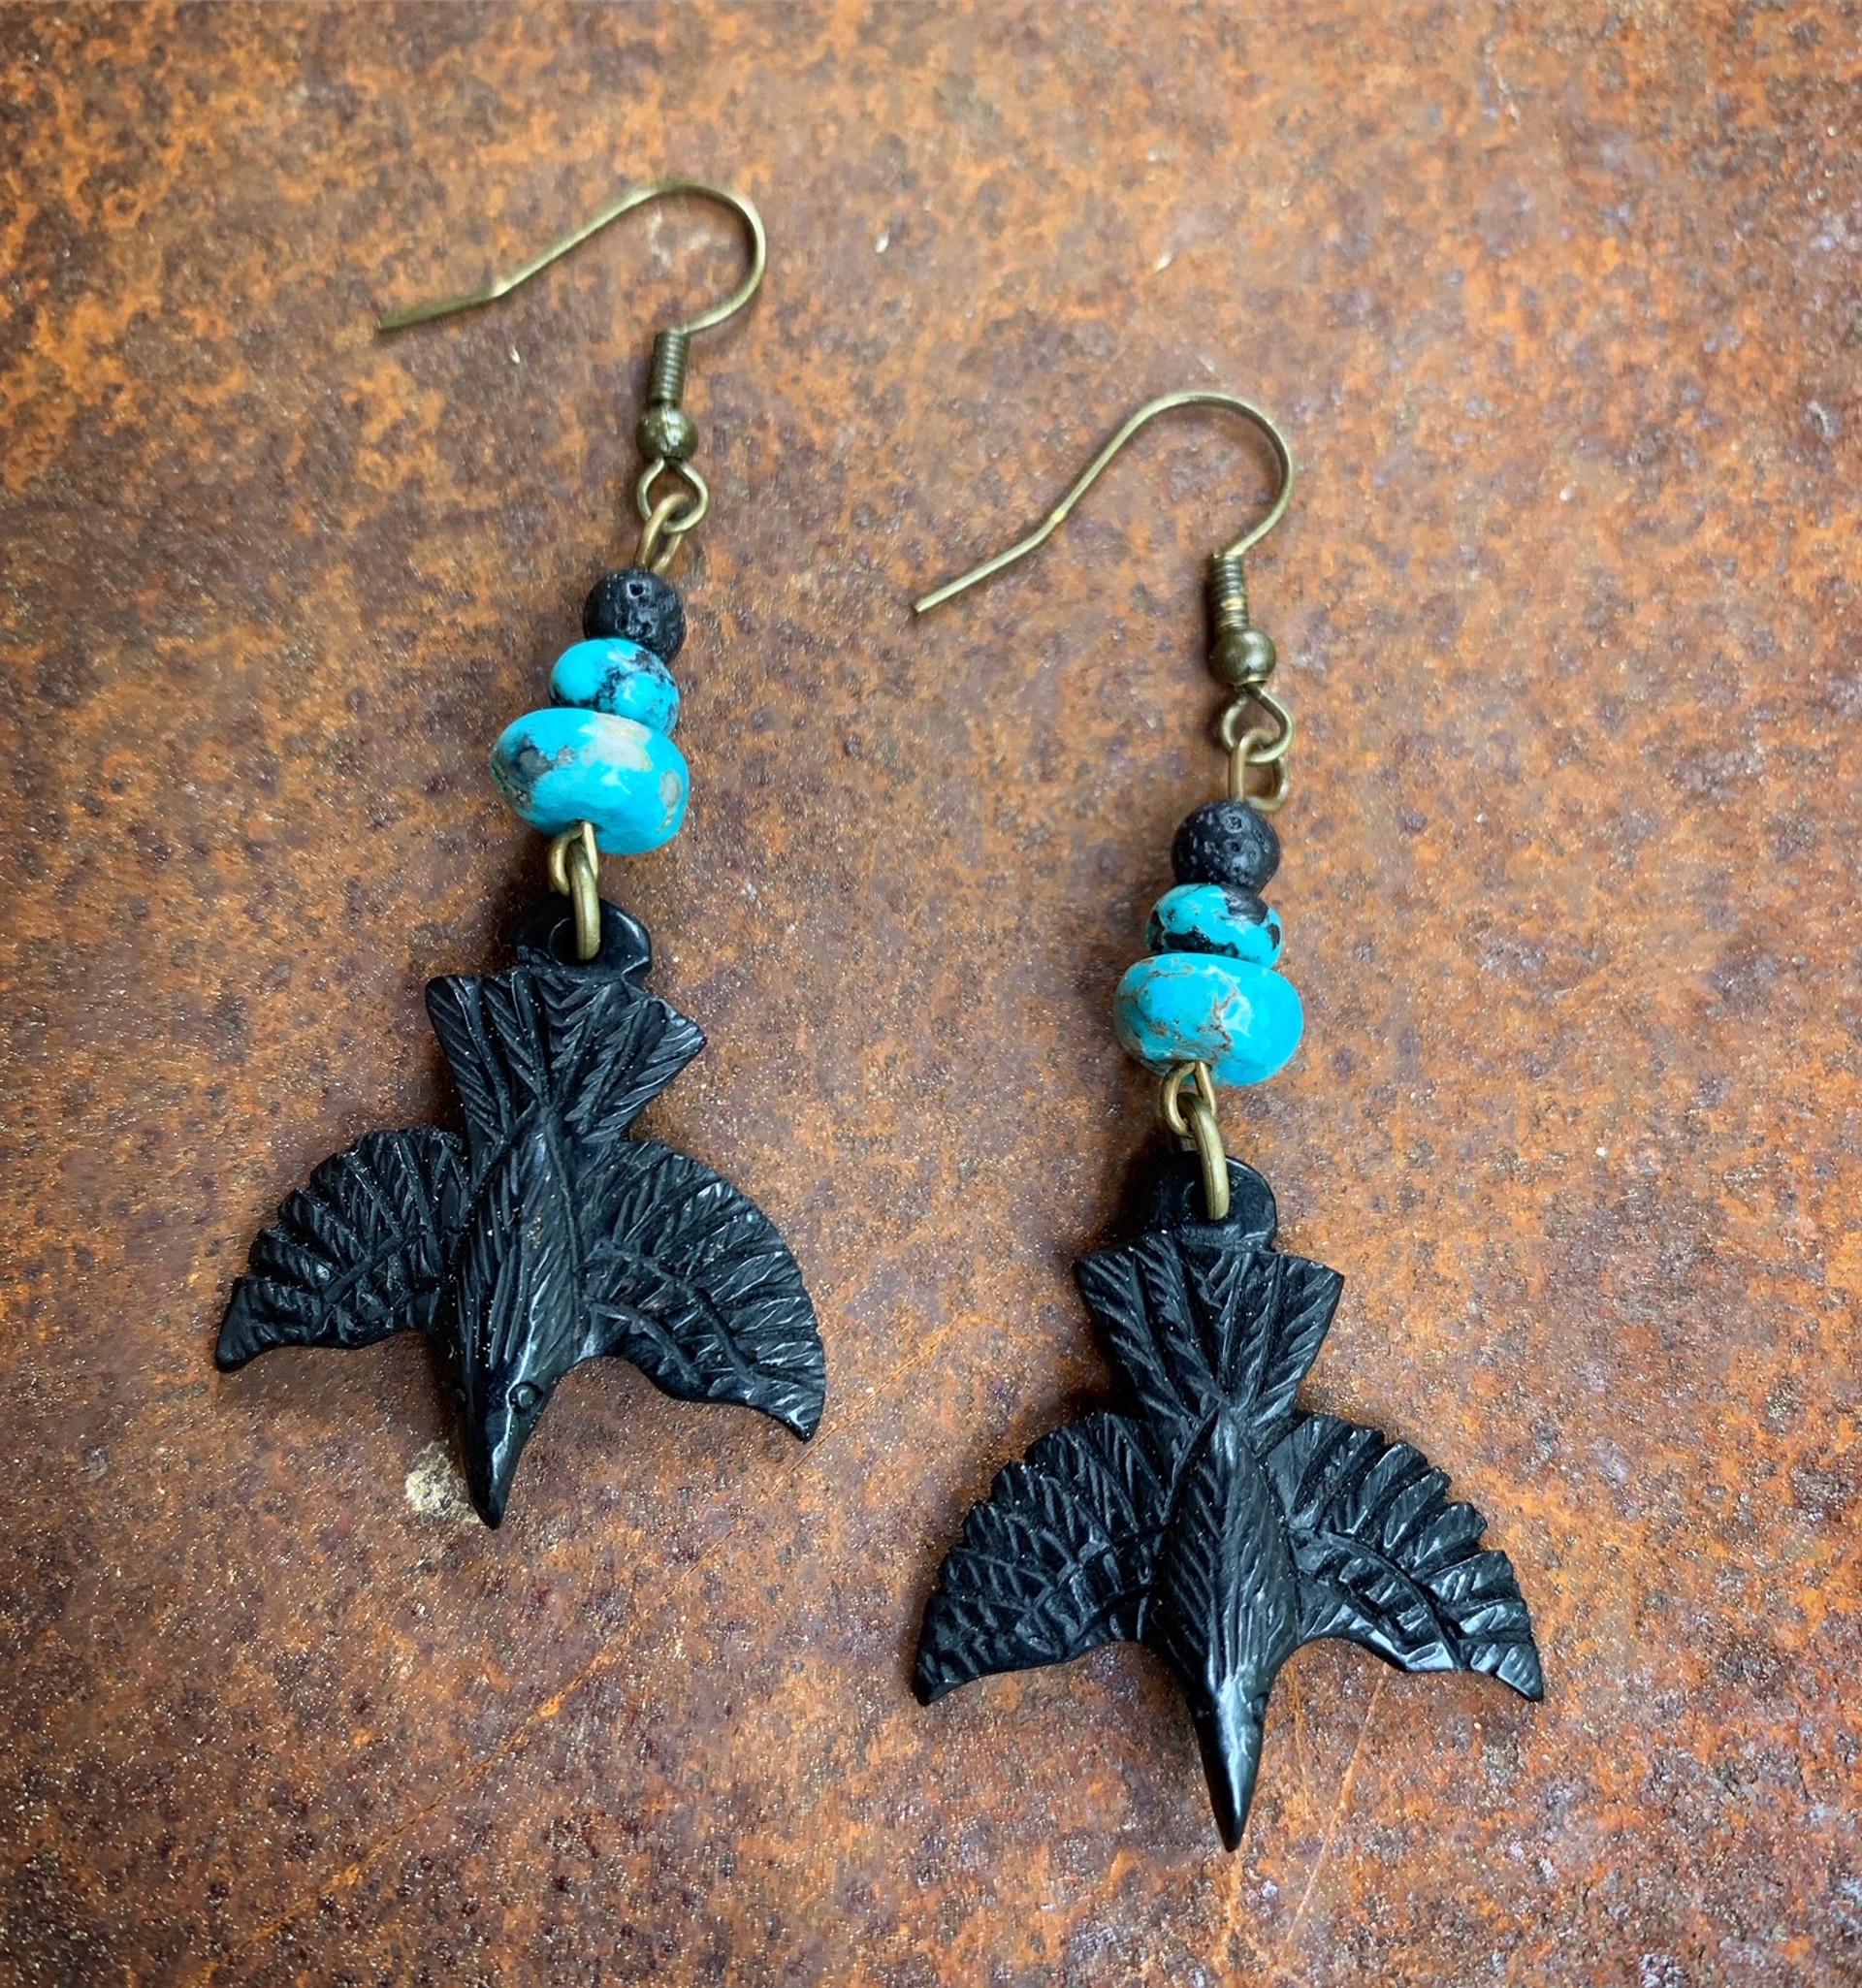 K860 Carved Buffalo Horn Raven Earrings with Turquoise by Kelly Ormsby